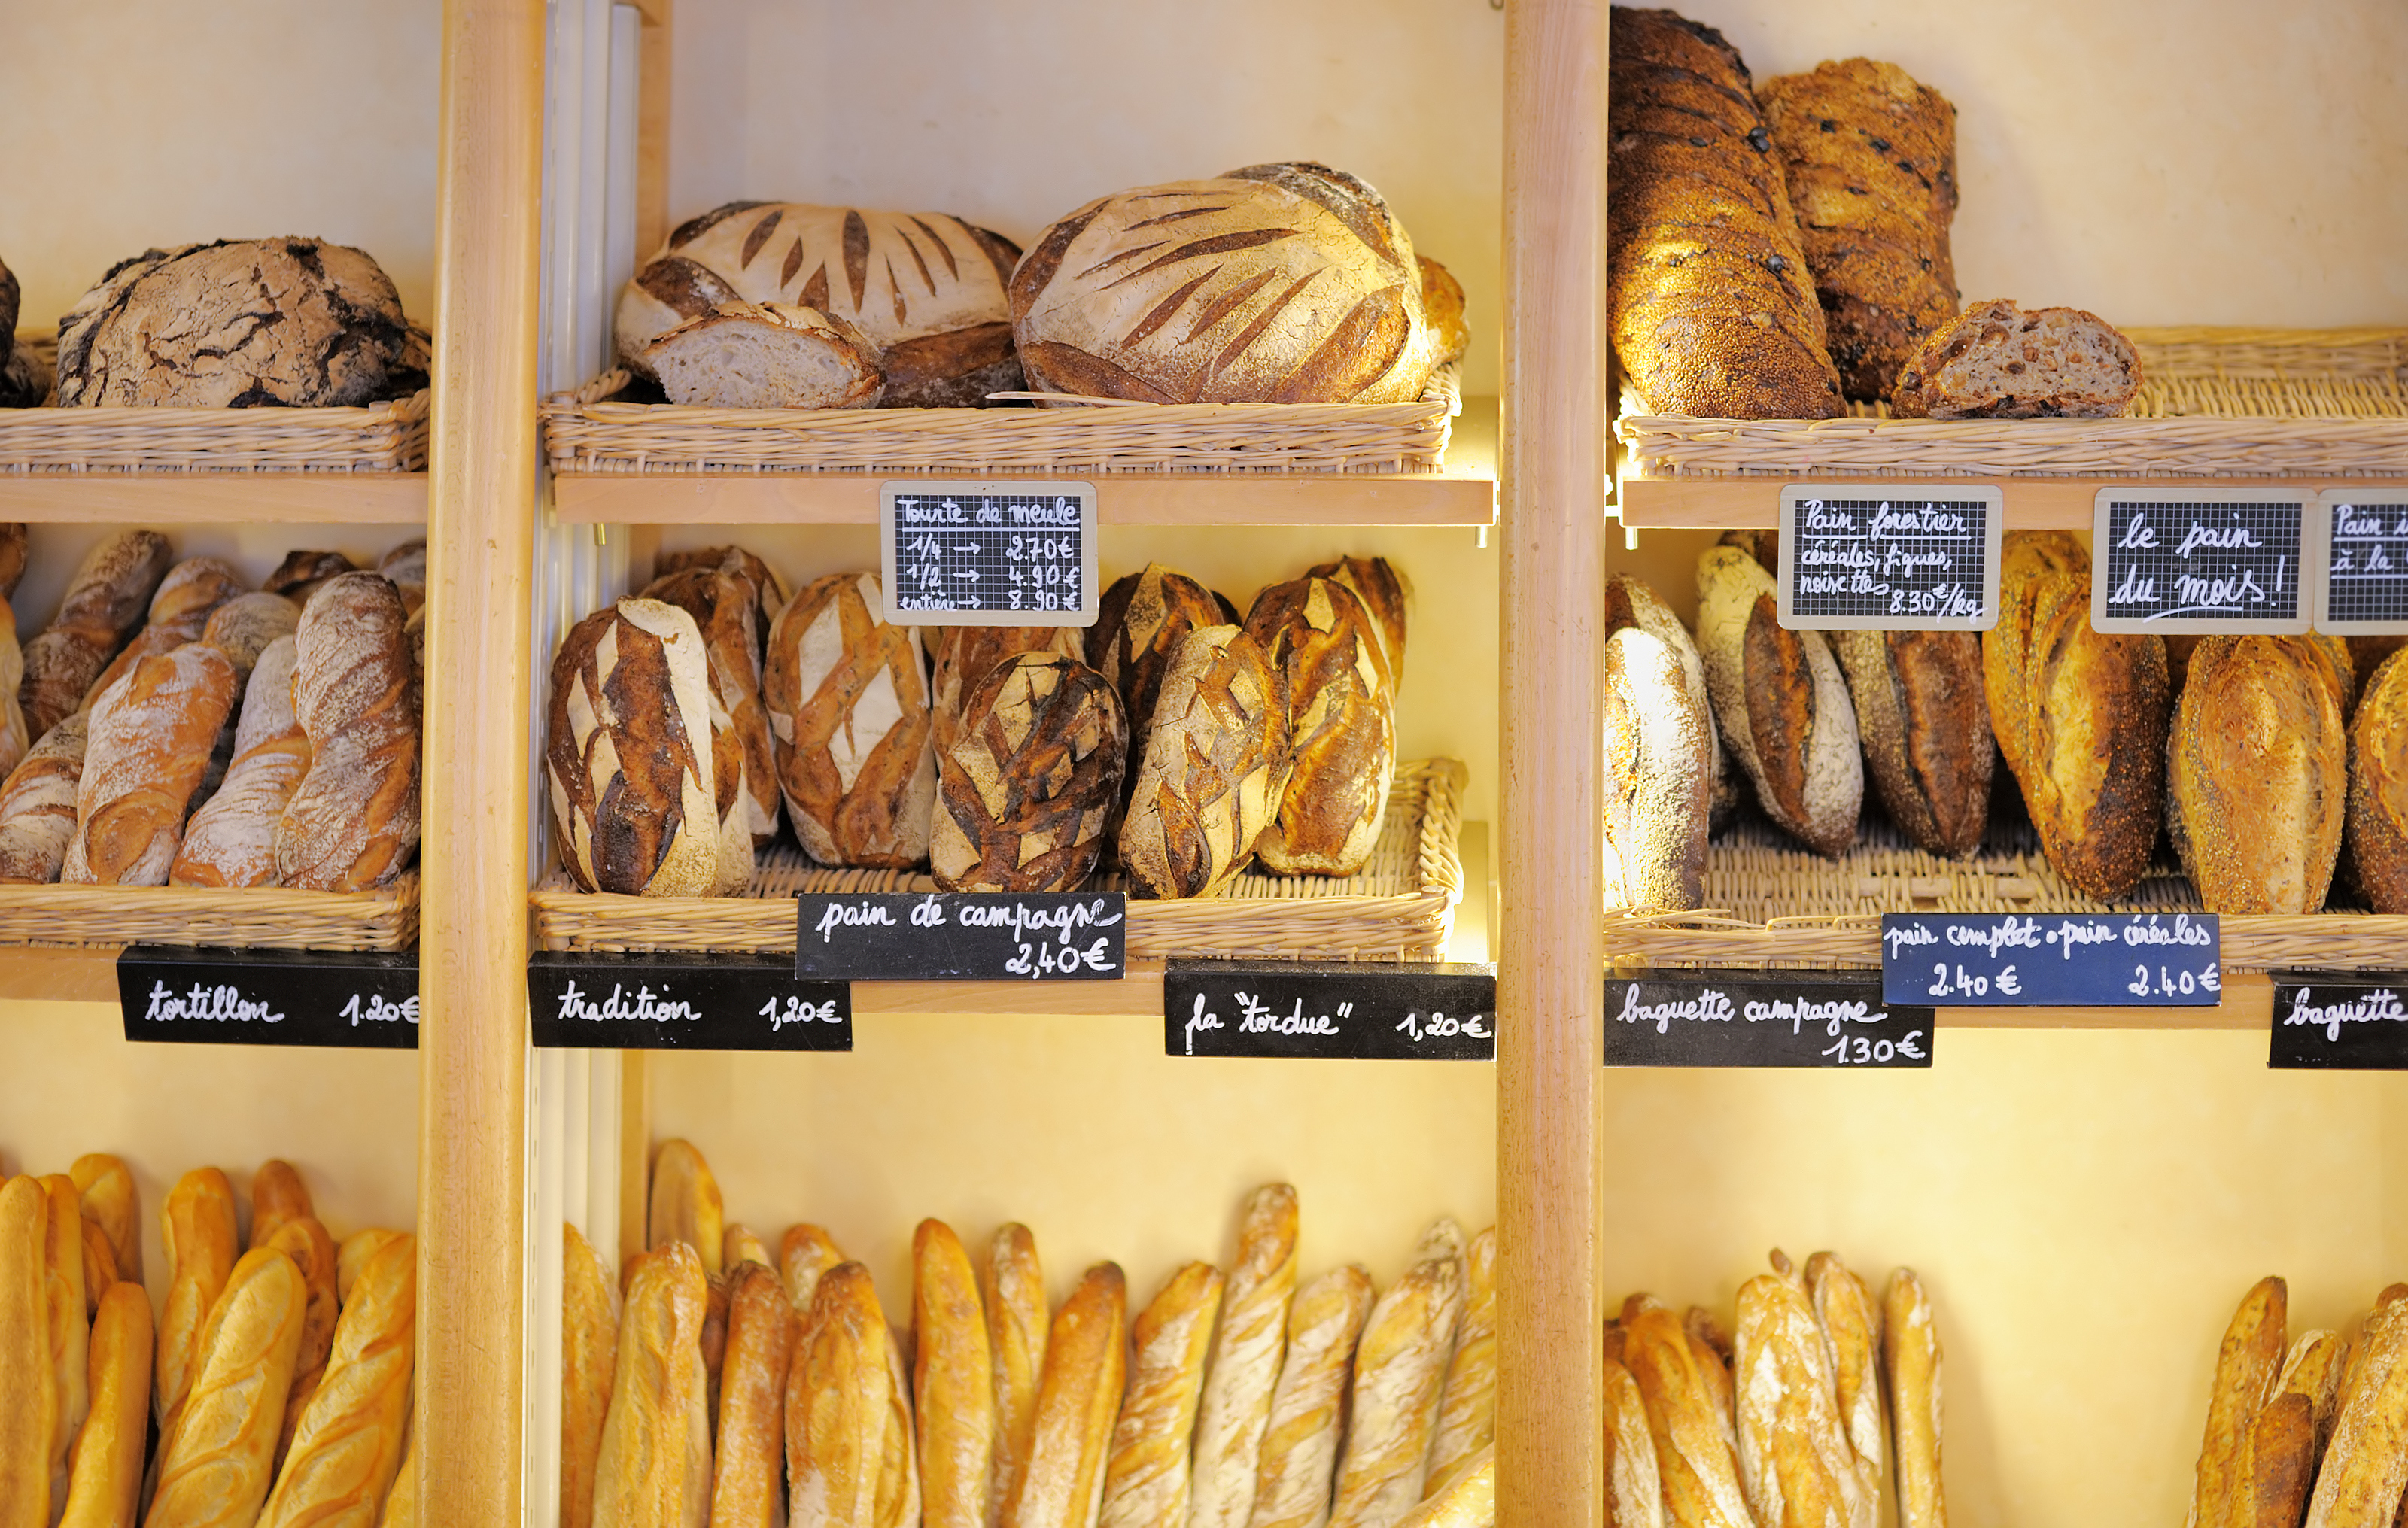 A bakery display of fresh loaves of bread